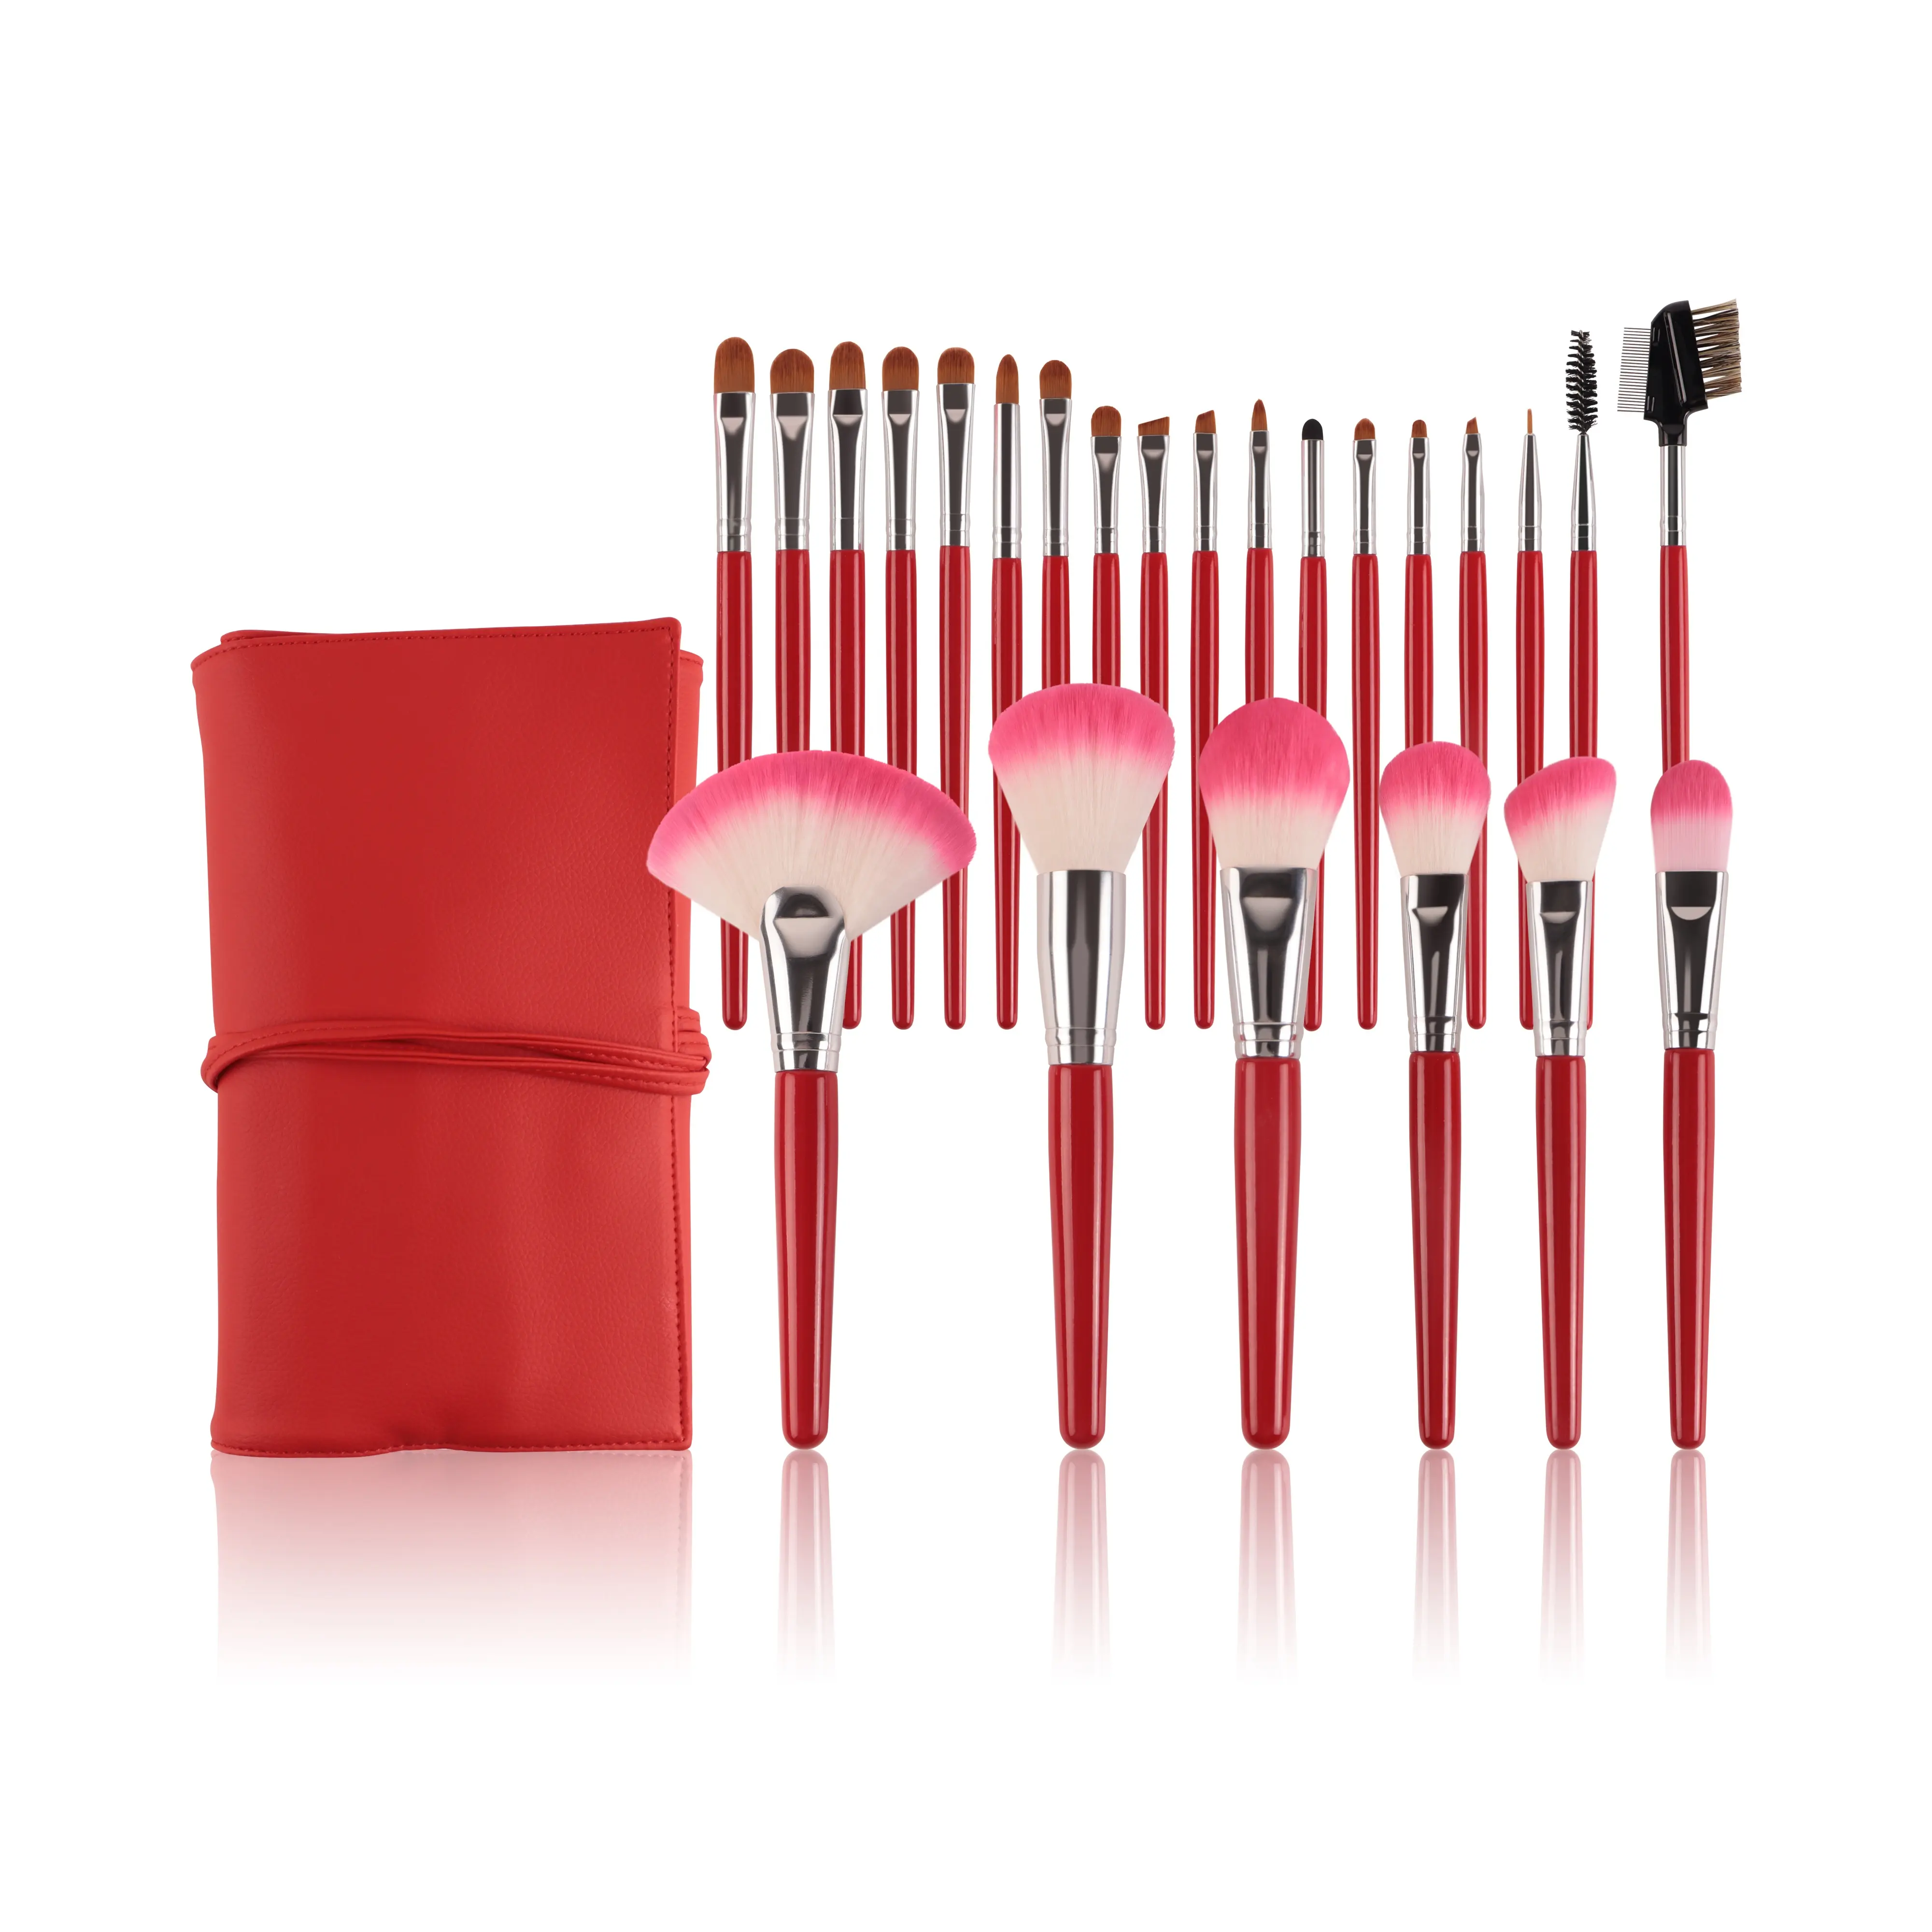 Professional Quality 24 Pcs Makeup Brush Set With 100% Synthetic Hair And Red Wooden Handle